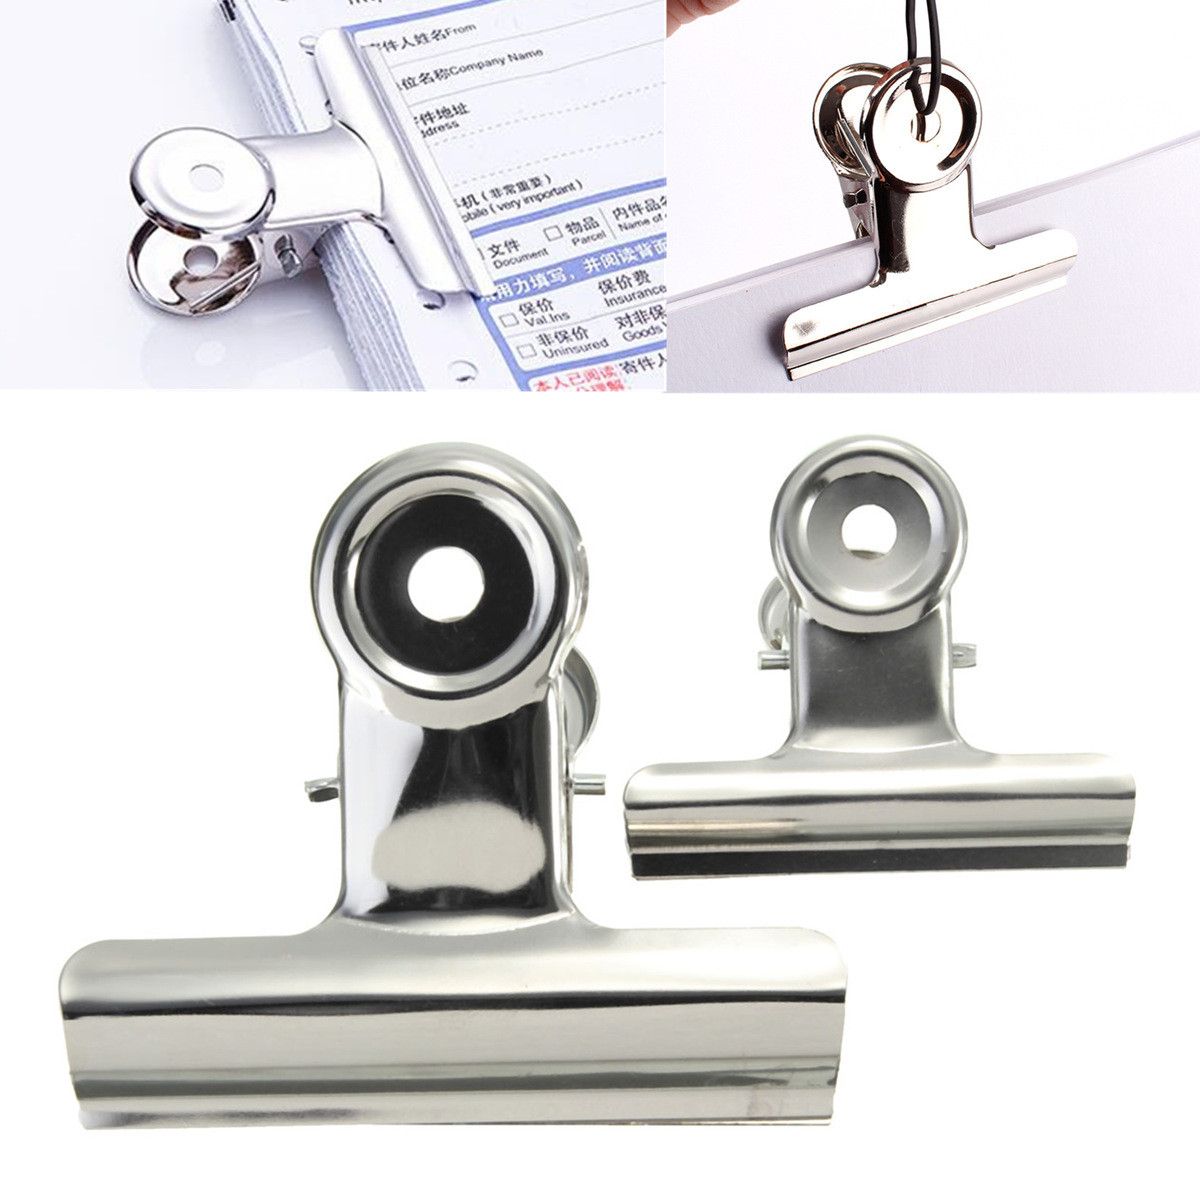 6pcs-Stainless-Steel-Silver-Bulldog-Clips-Money-Letter-Binder-Paper-File-Clamps-1051127